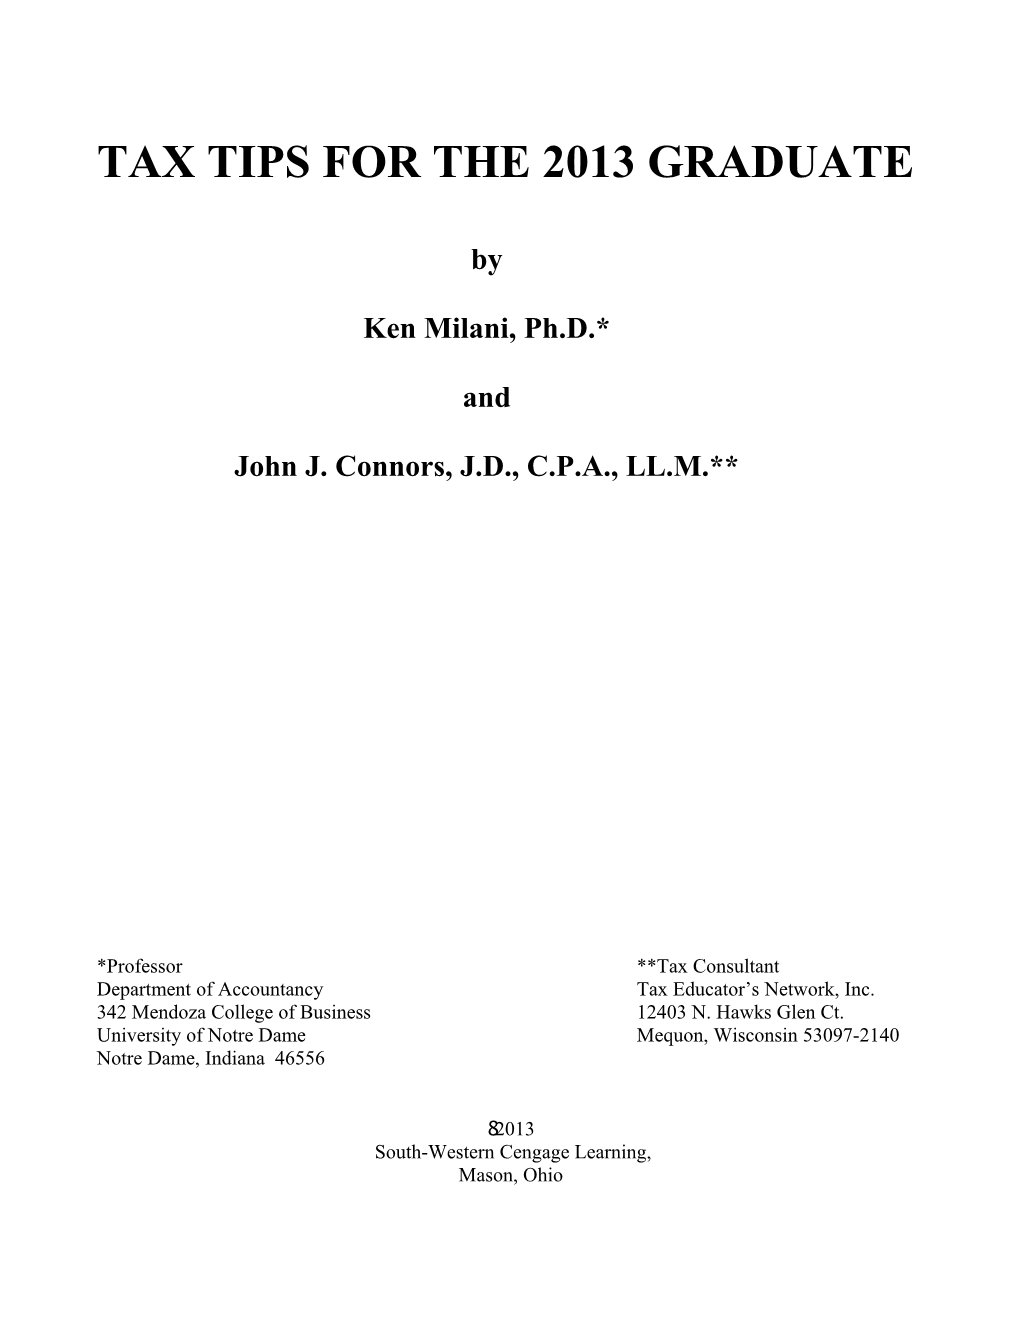 Tax Tips for the 2013 Graduate